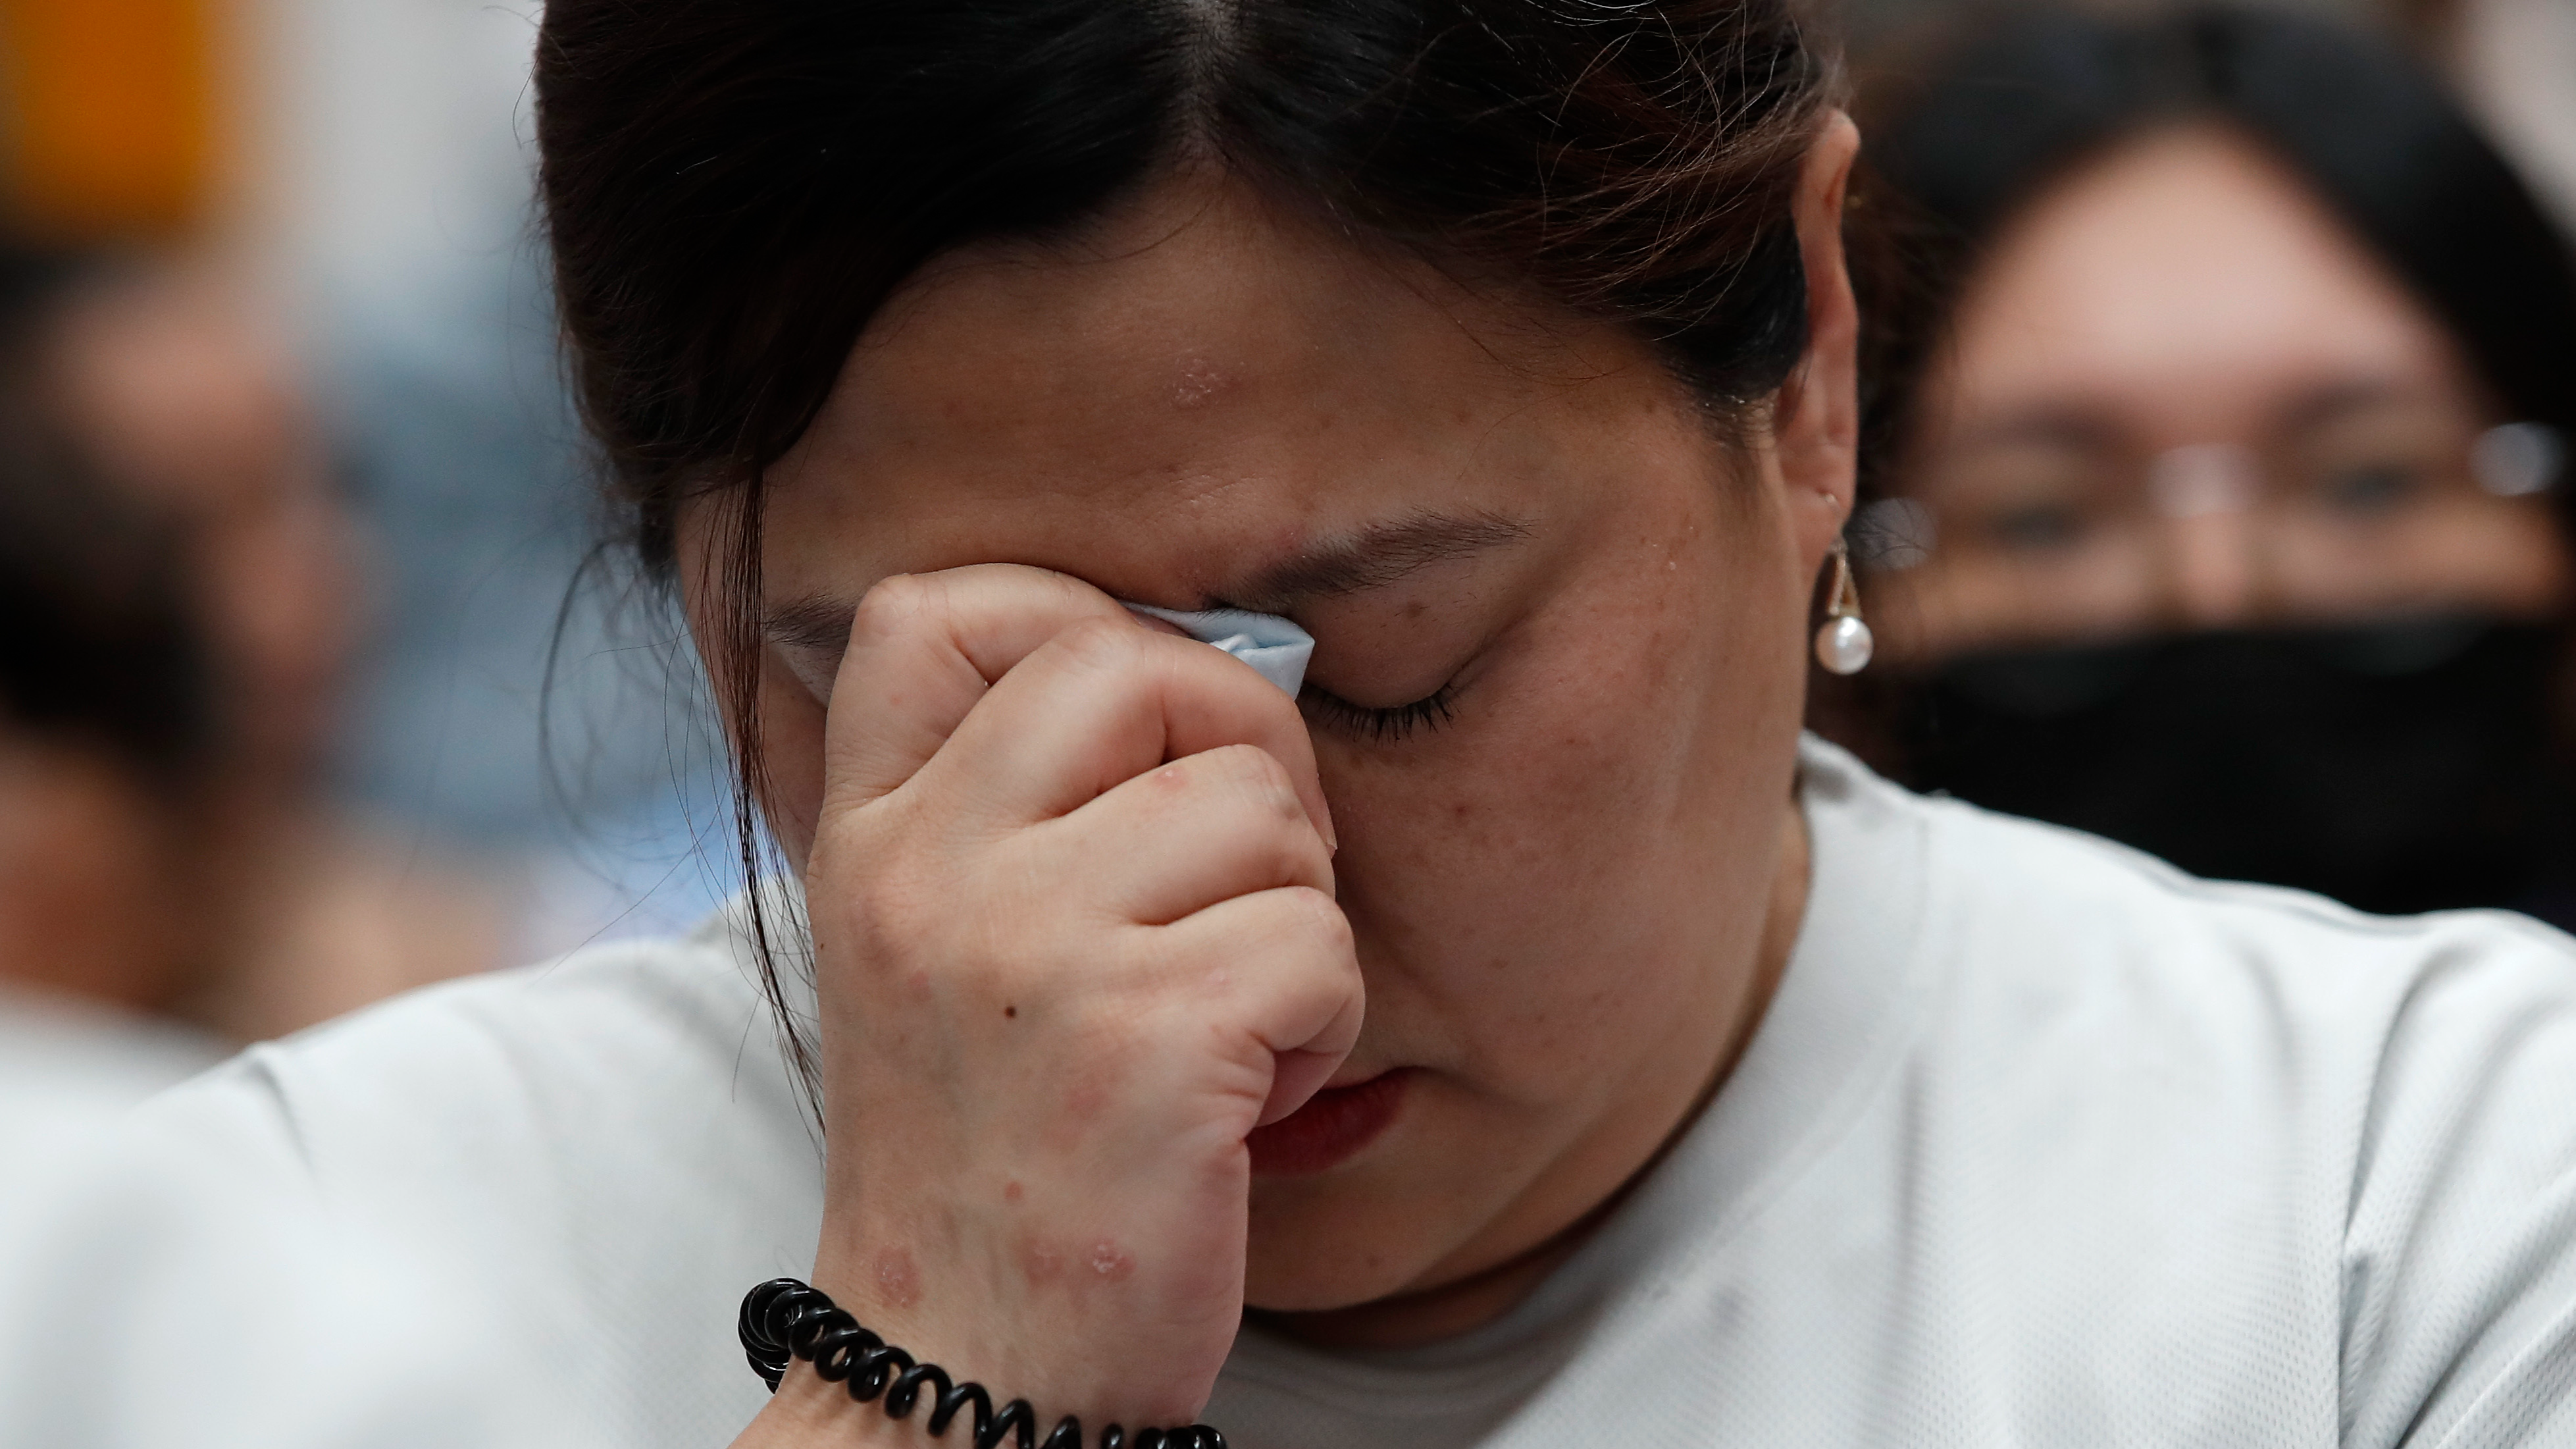 A family member of an MH-370 passenger breaks down in tears at an event marking 10 years since the tragedy. /FL Wong/AP